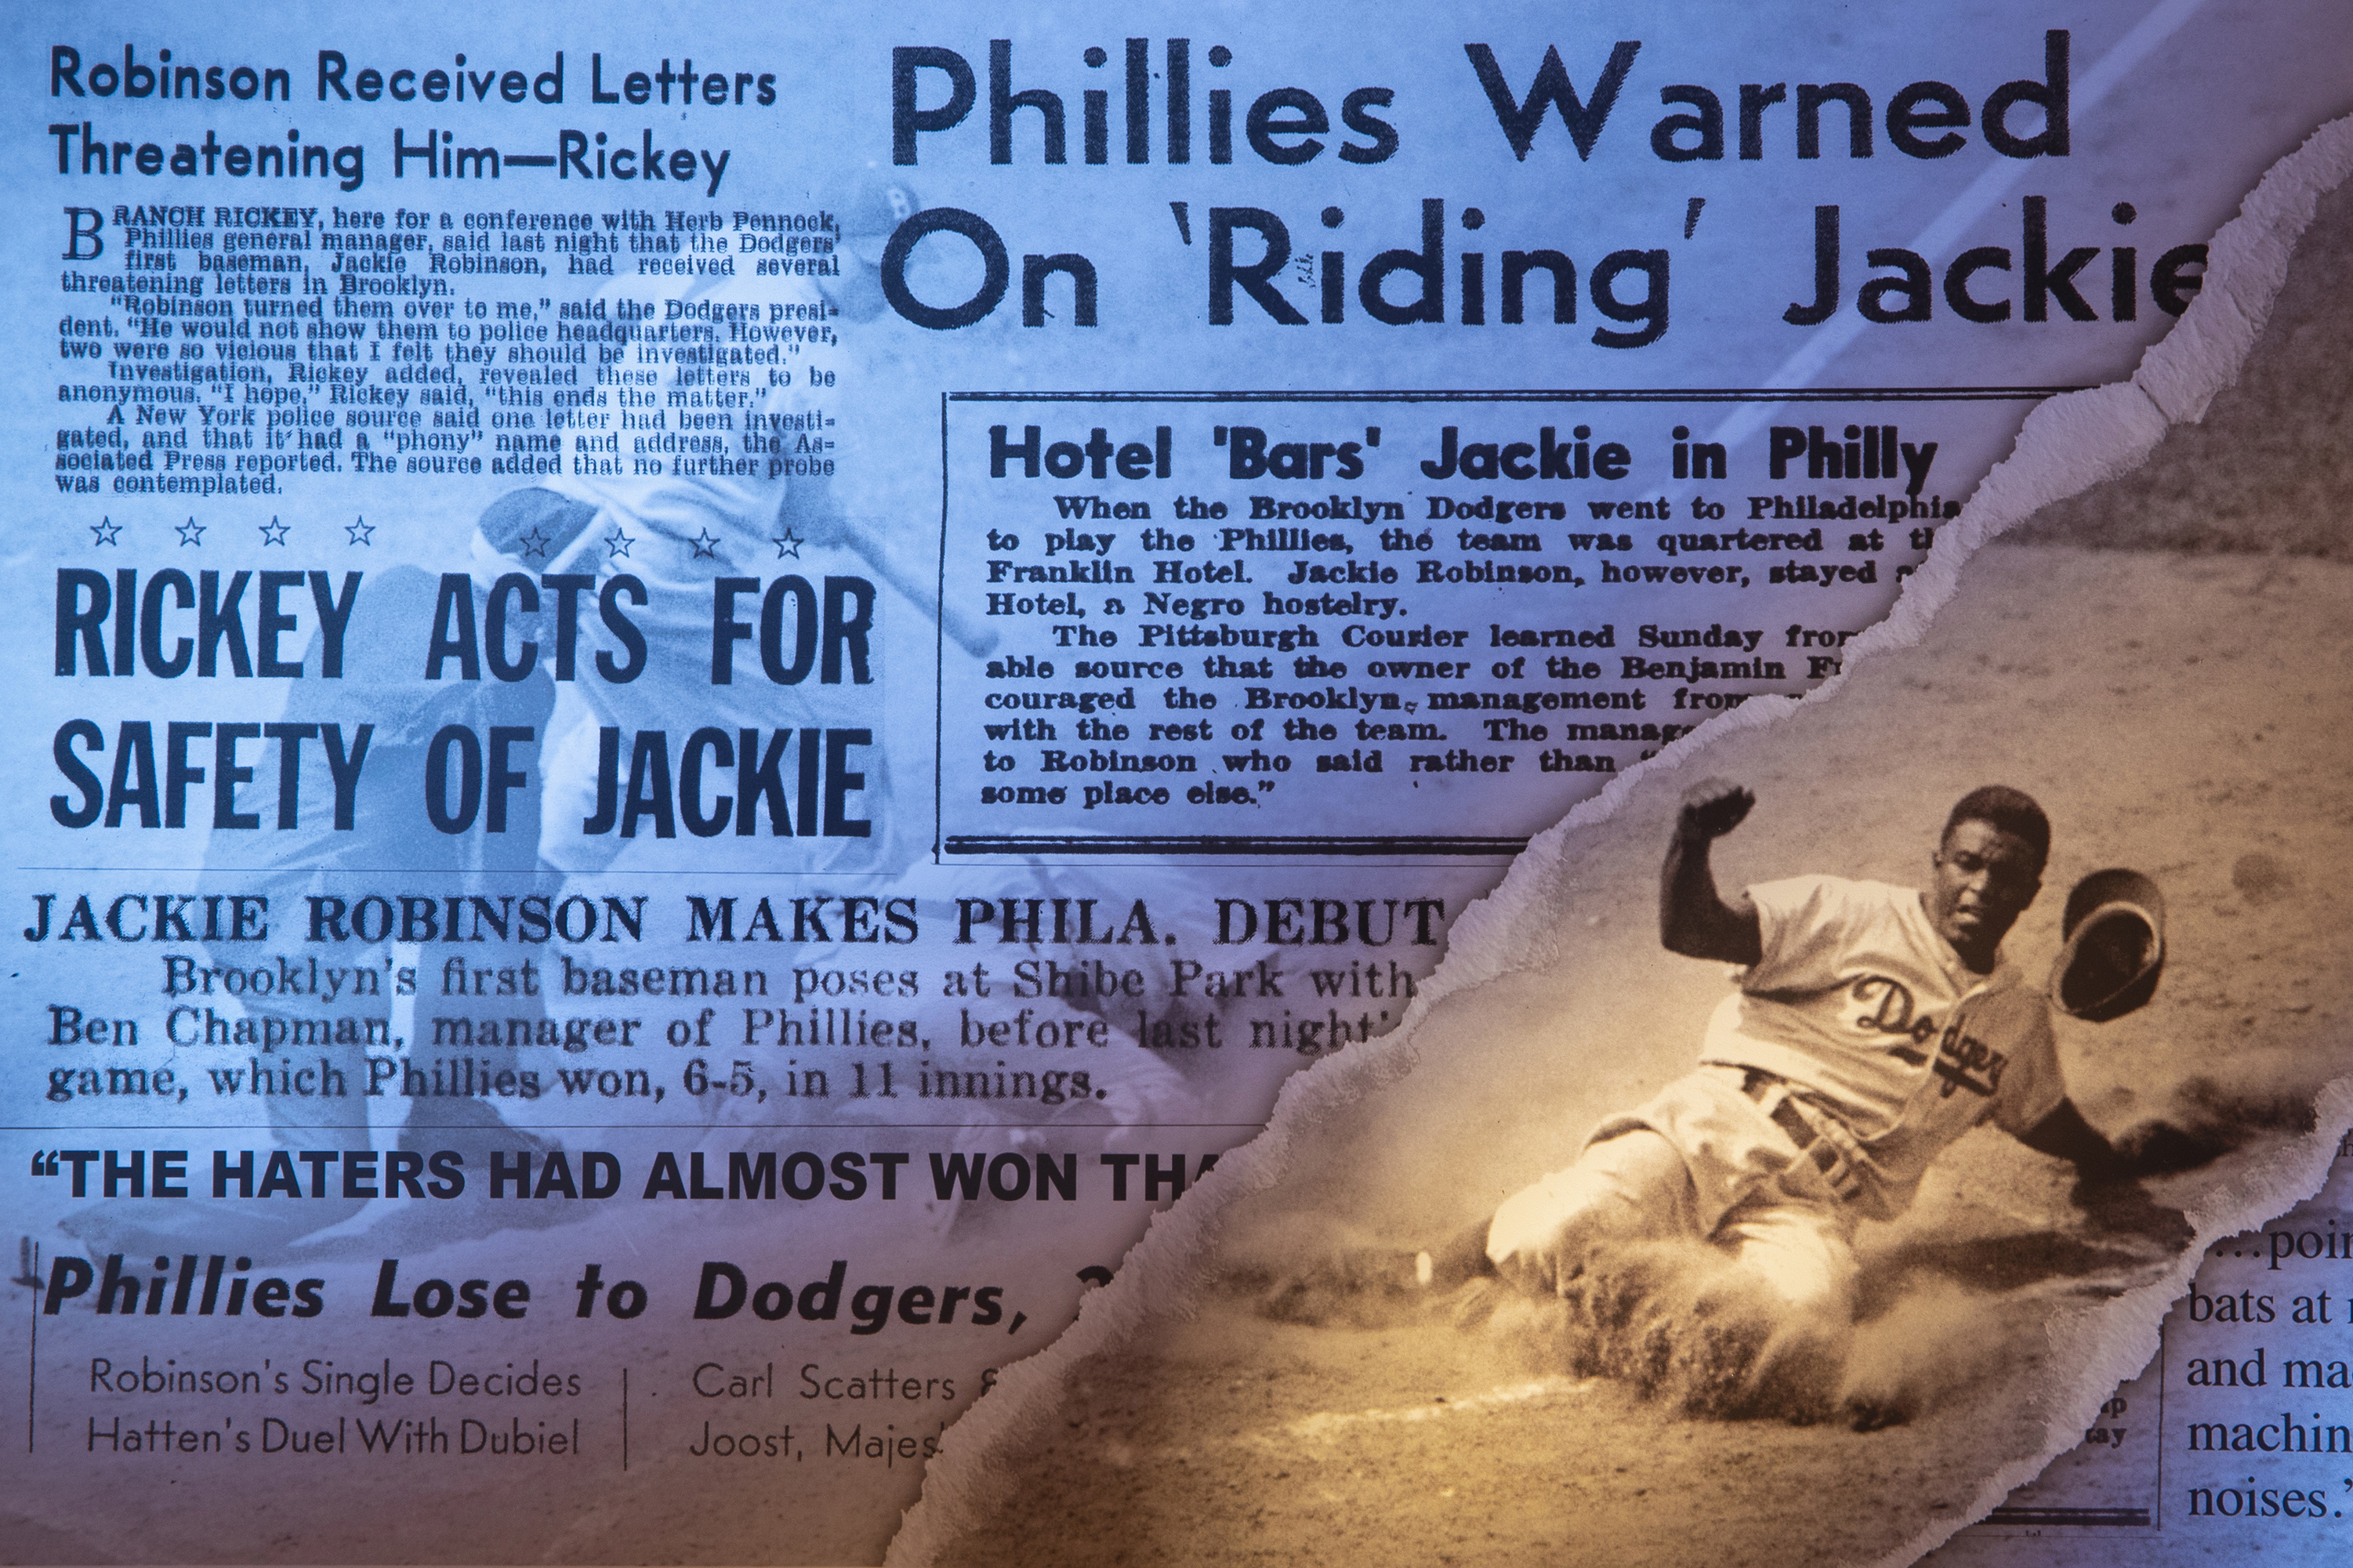 Biography - The Official Licensing Website of Jackie Robinson